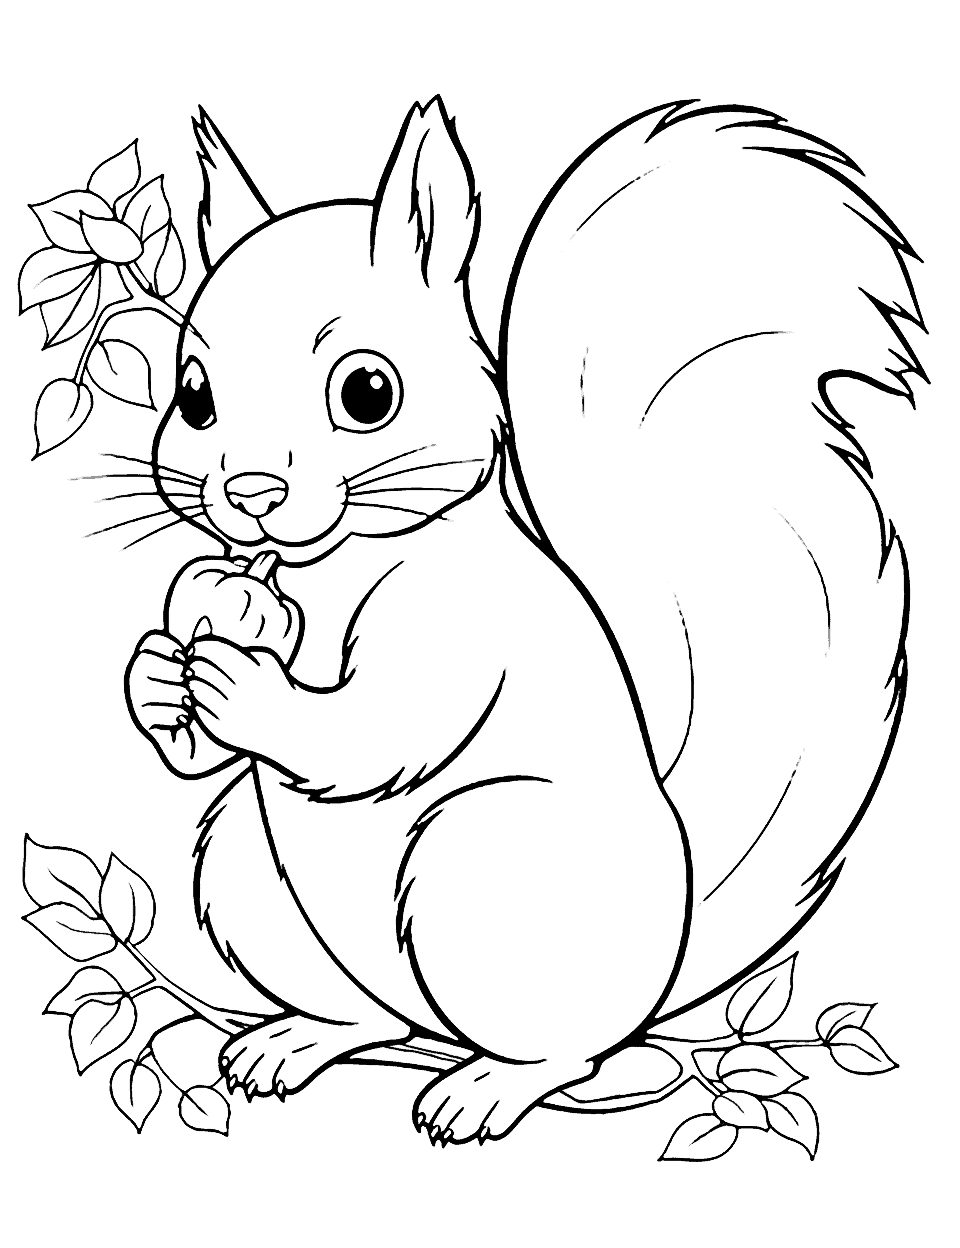 Curious Squirrel Animal Coloring Page - A curious squirrel perched on a tree branch, holding an acorn.